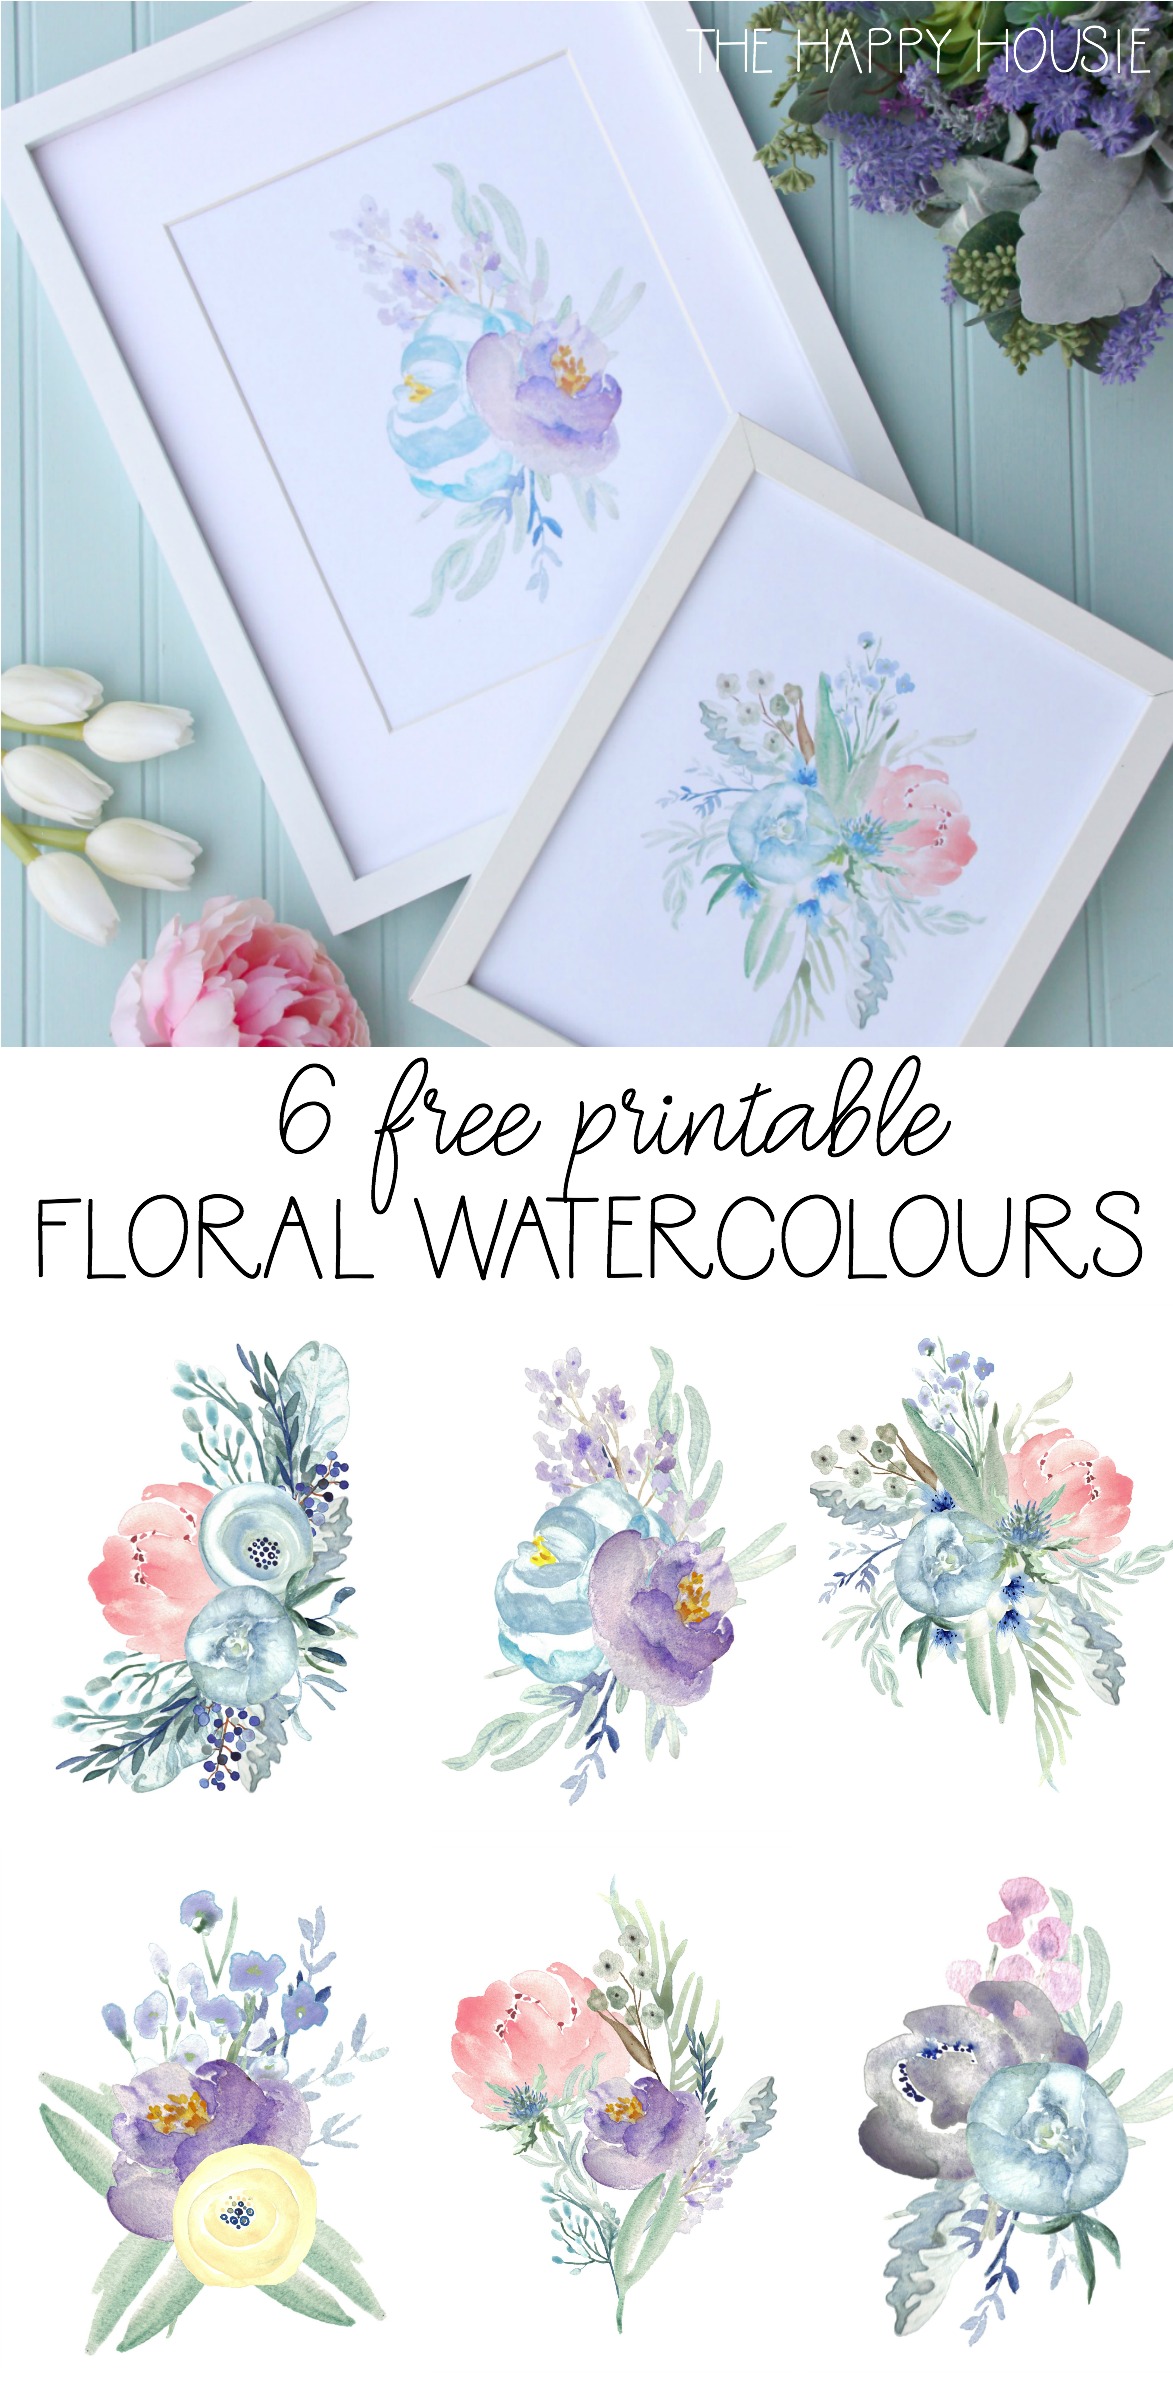 6 Free Printable Floral Watercolours poster.